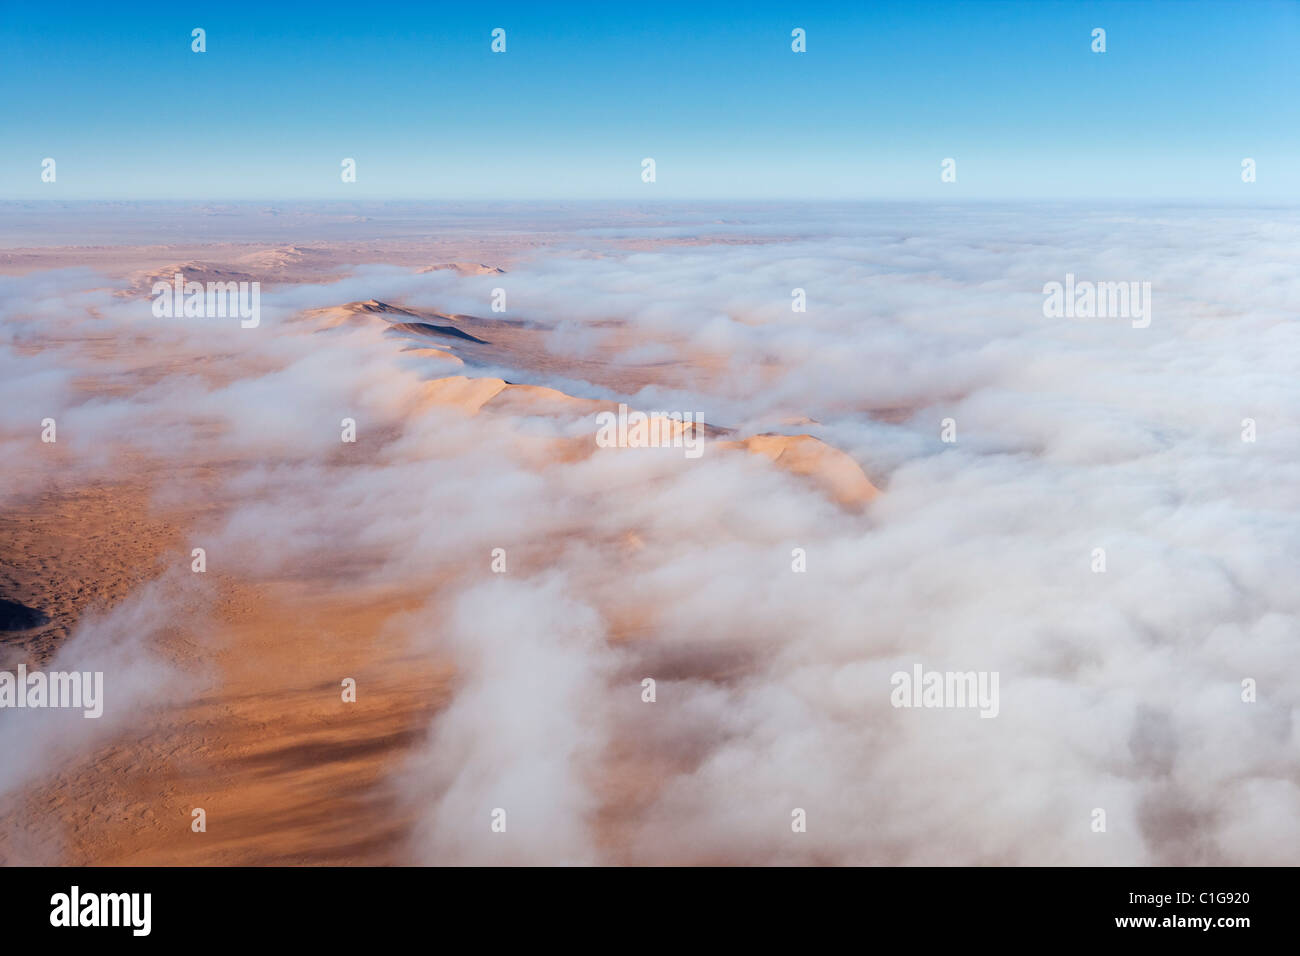 Aerial view of sand dunes of the Namibian desert Stock Photo